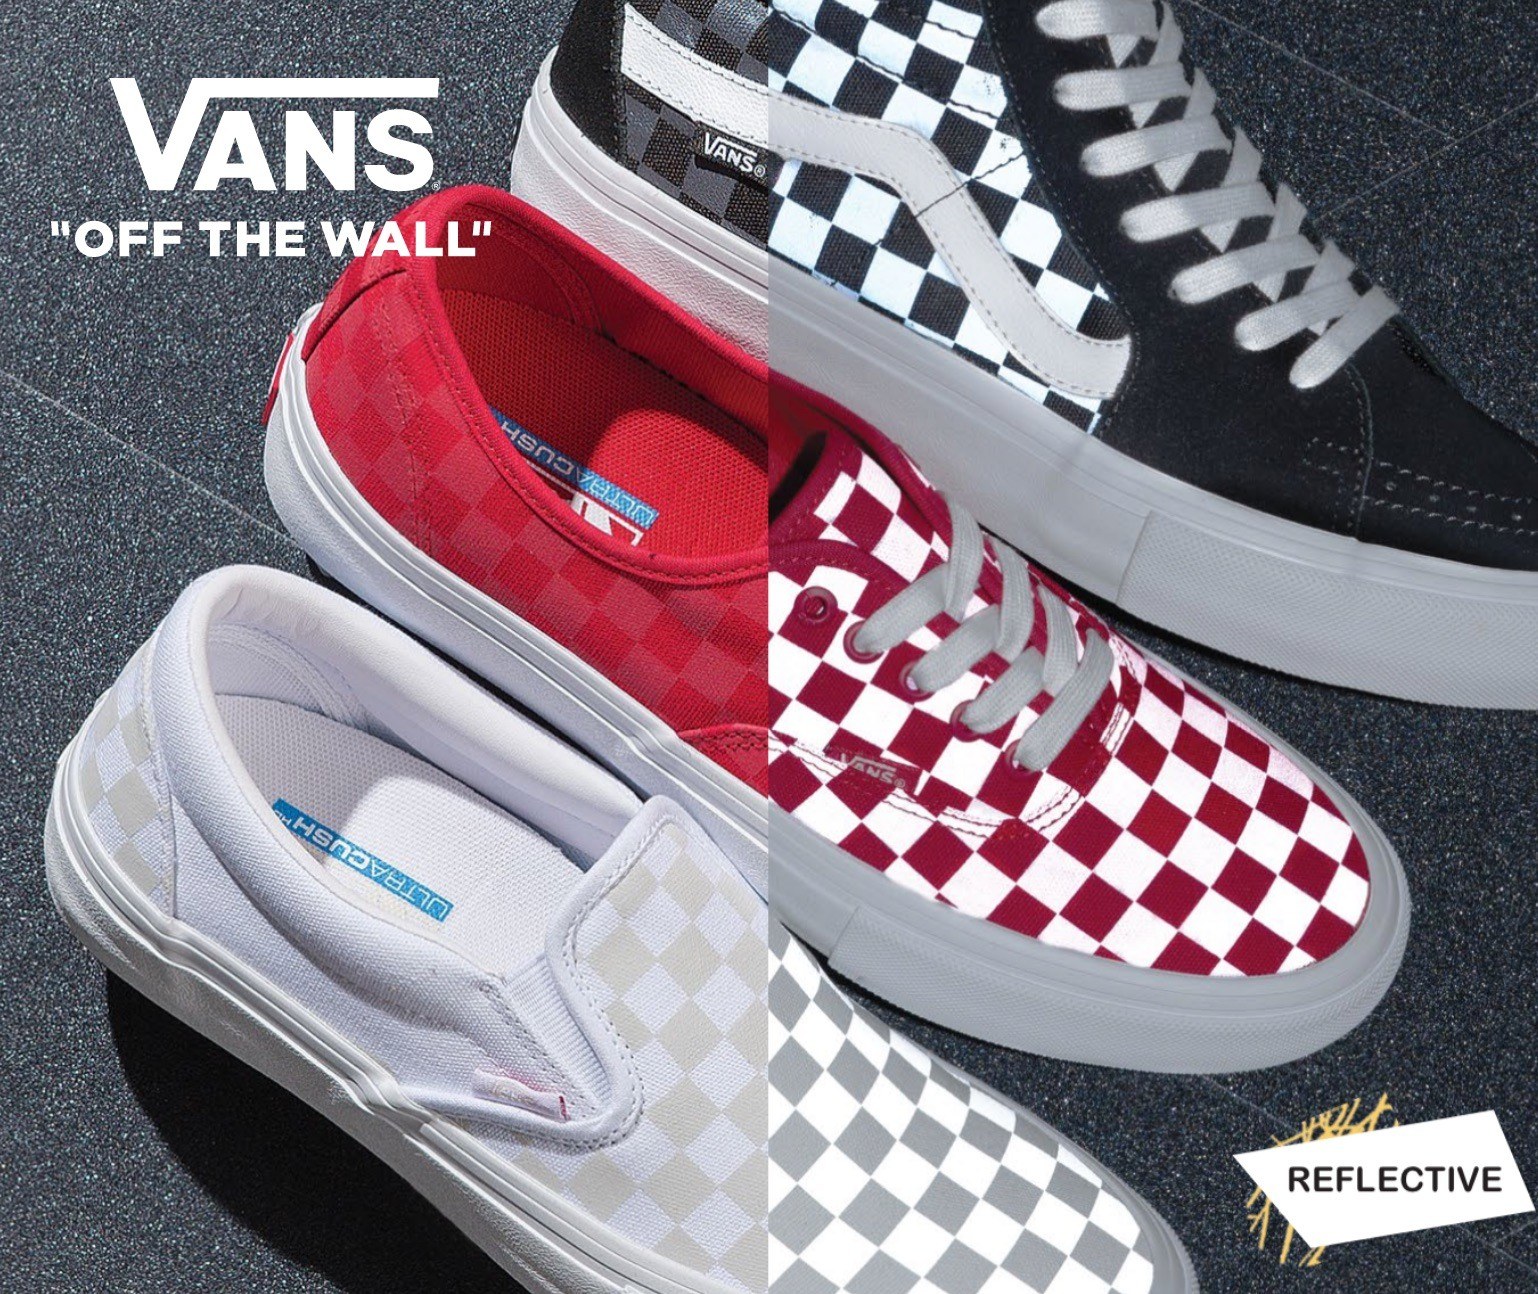 Advertisement showing Vans skate shoes in white, red, and black colorways with the Vans logo, and the call out "reflective"